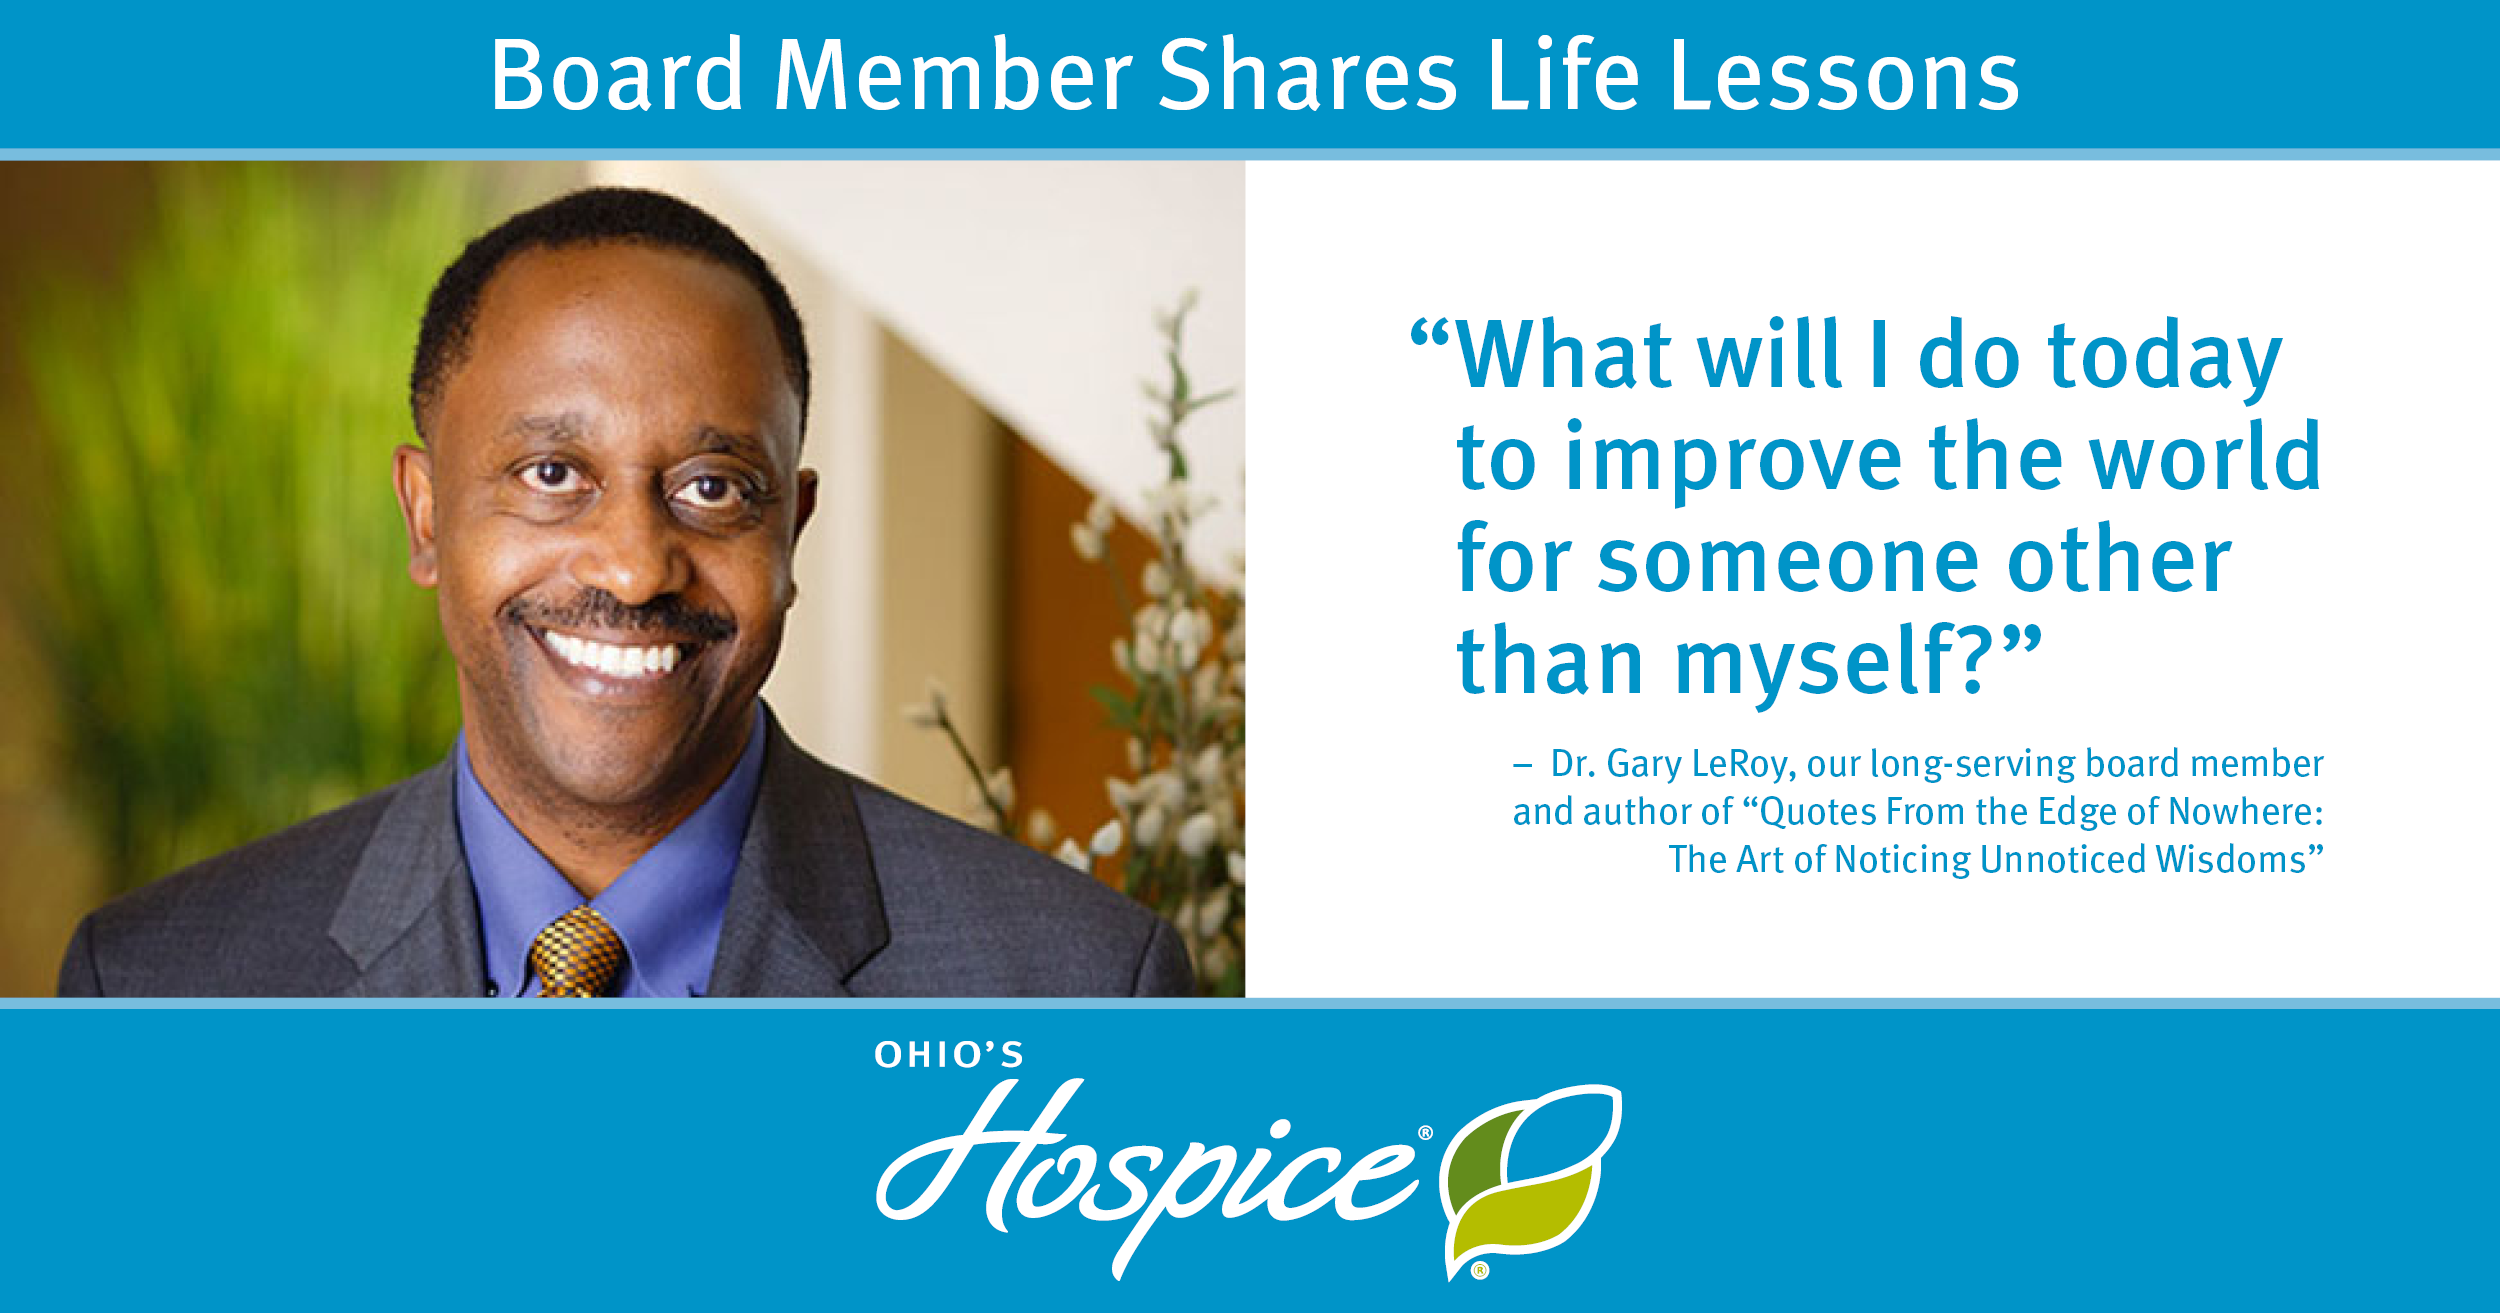 Board Member Shares Life Lessons